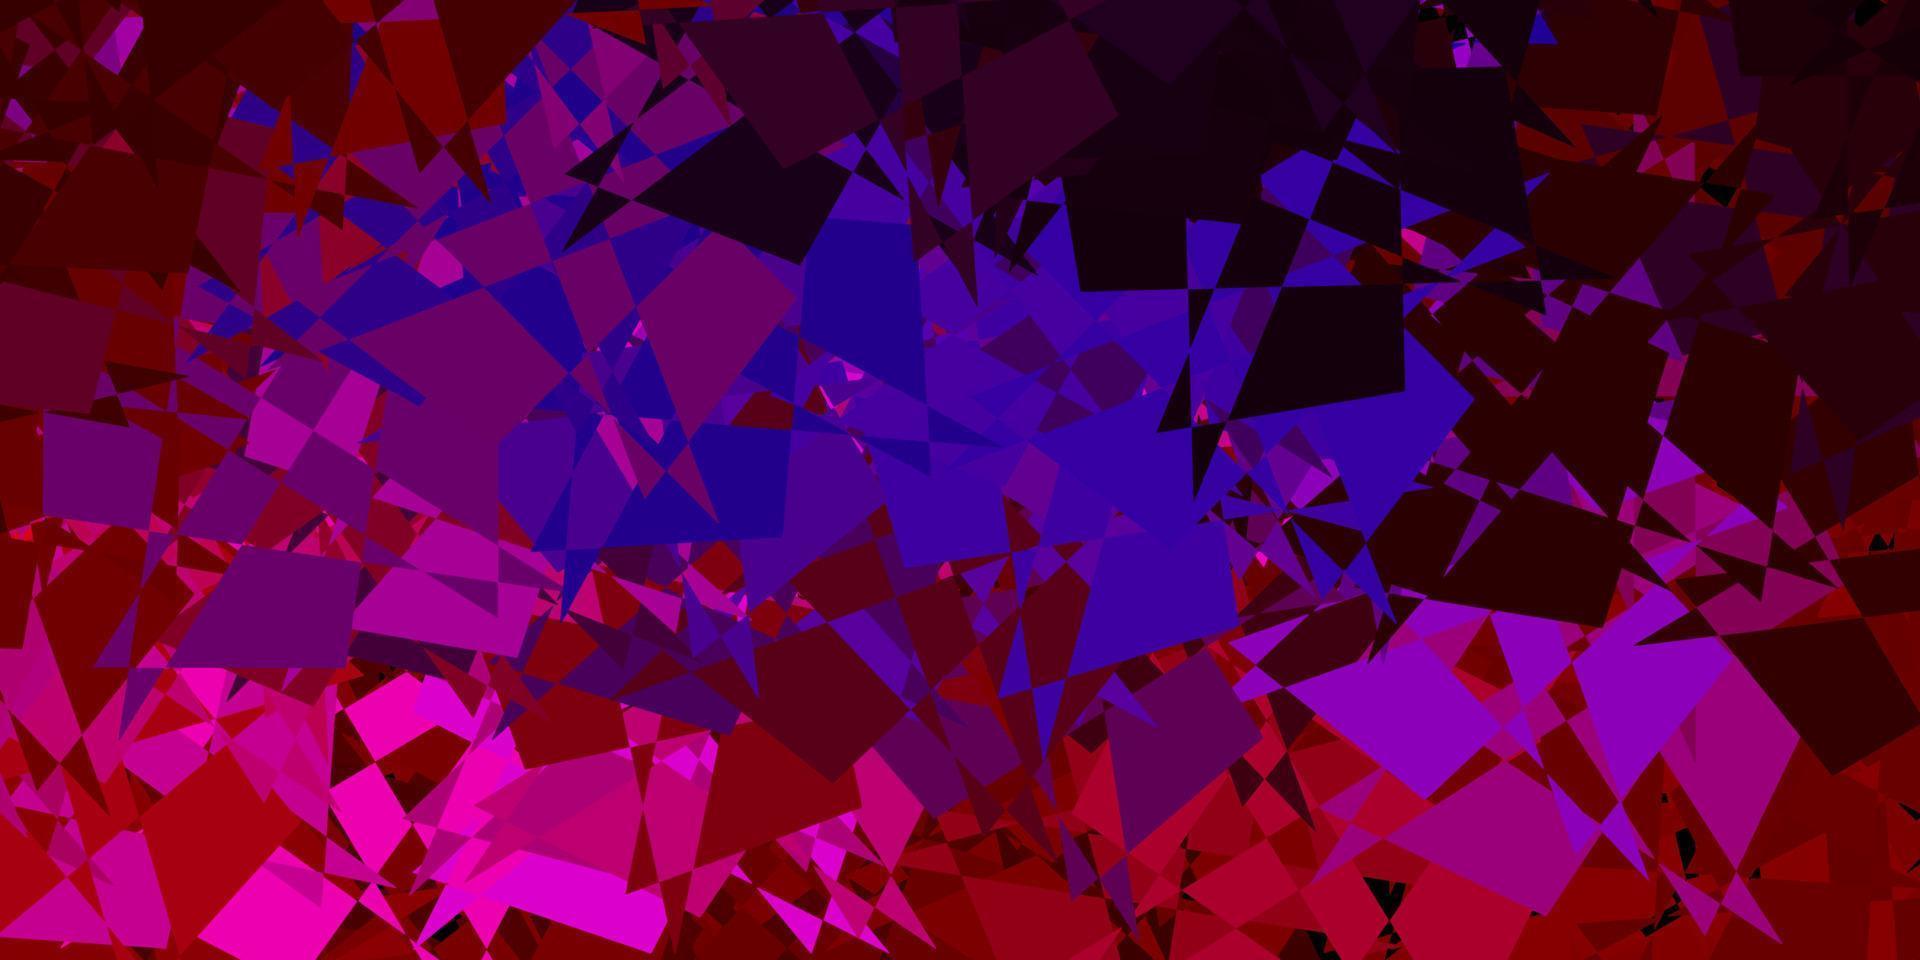 Dark blue, red vector backdrop with chaotic shapes.